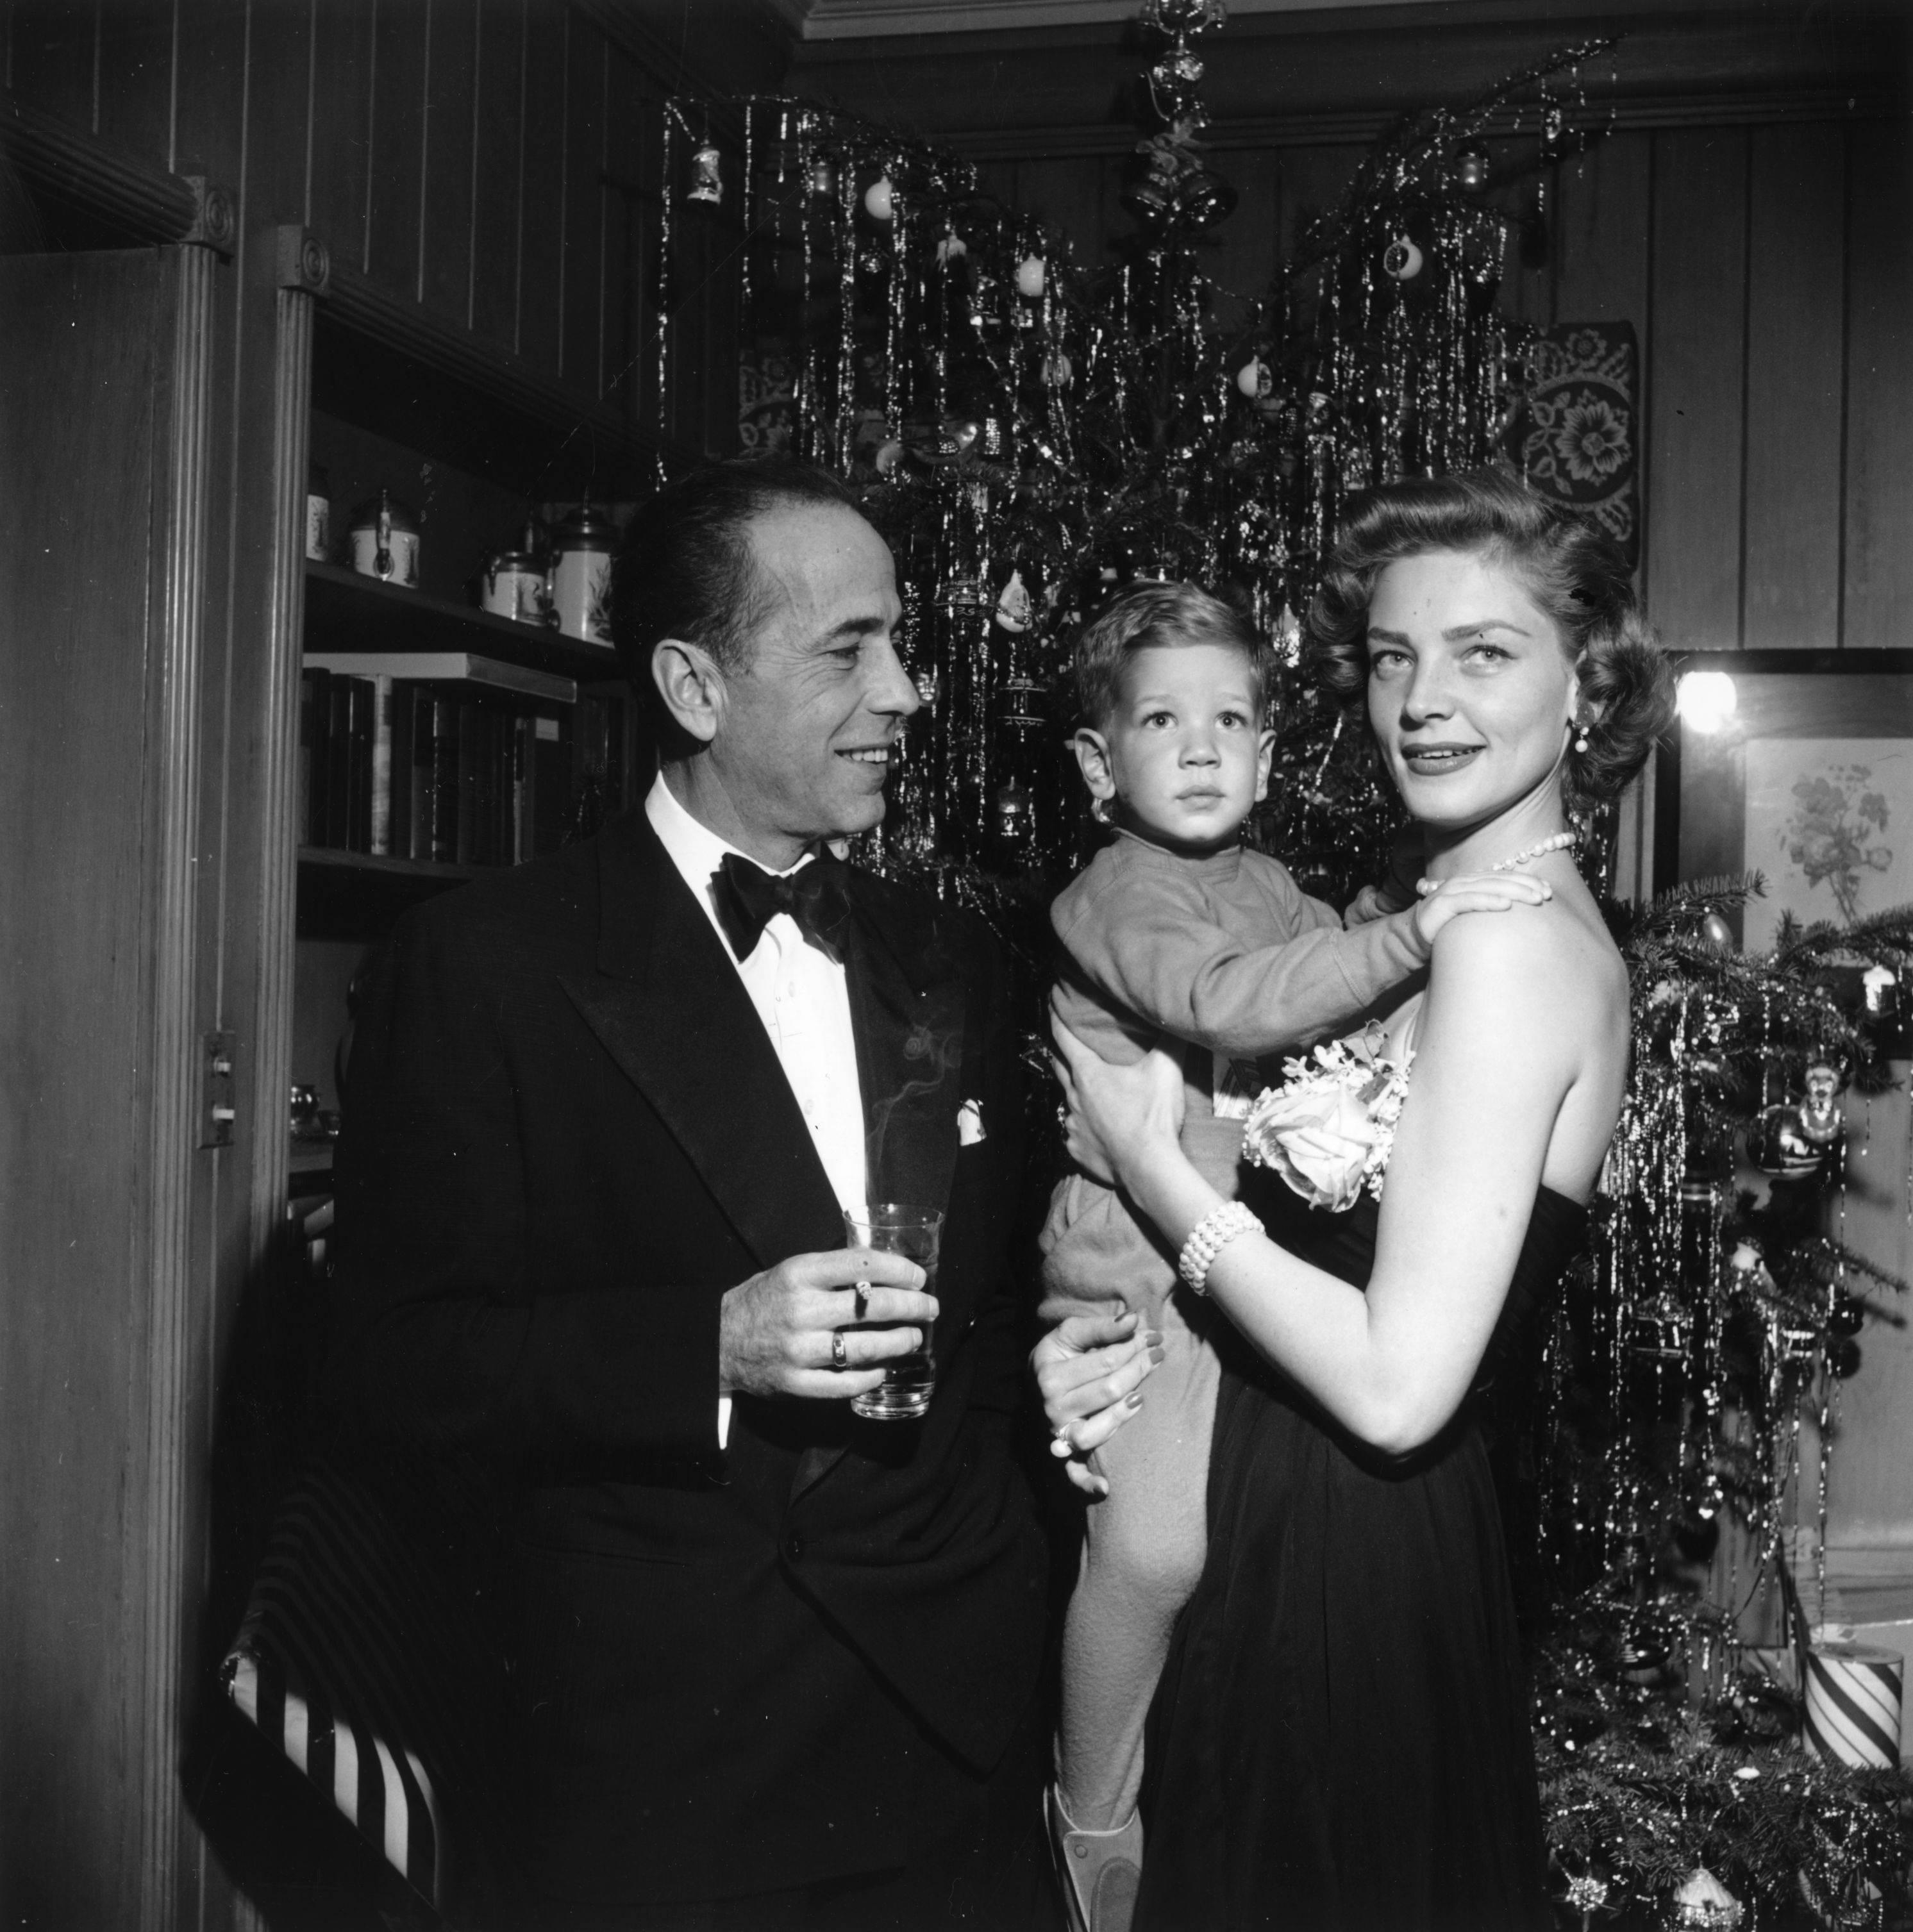 Slim Aarons Black and White Photograph - Bacall And Bogart (Estate Stamped Limited Edition of 150)